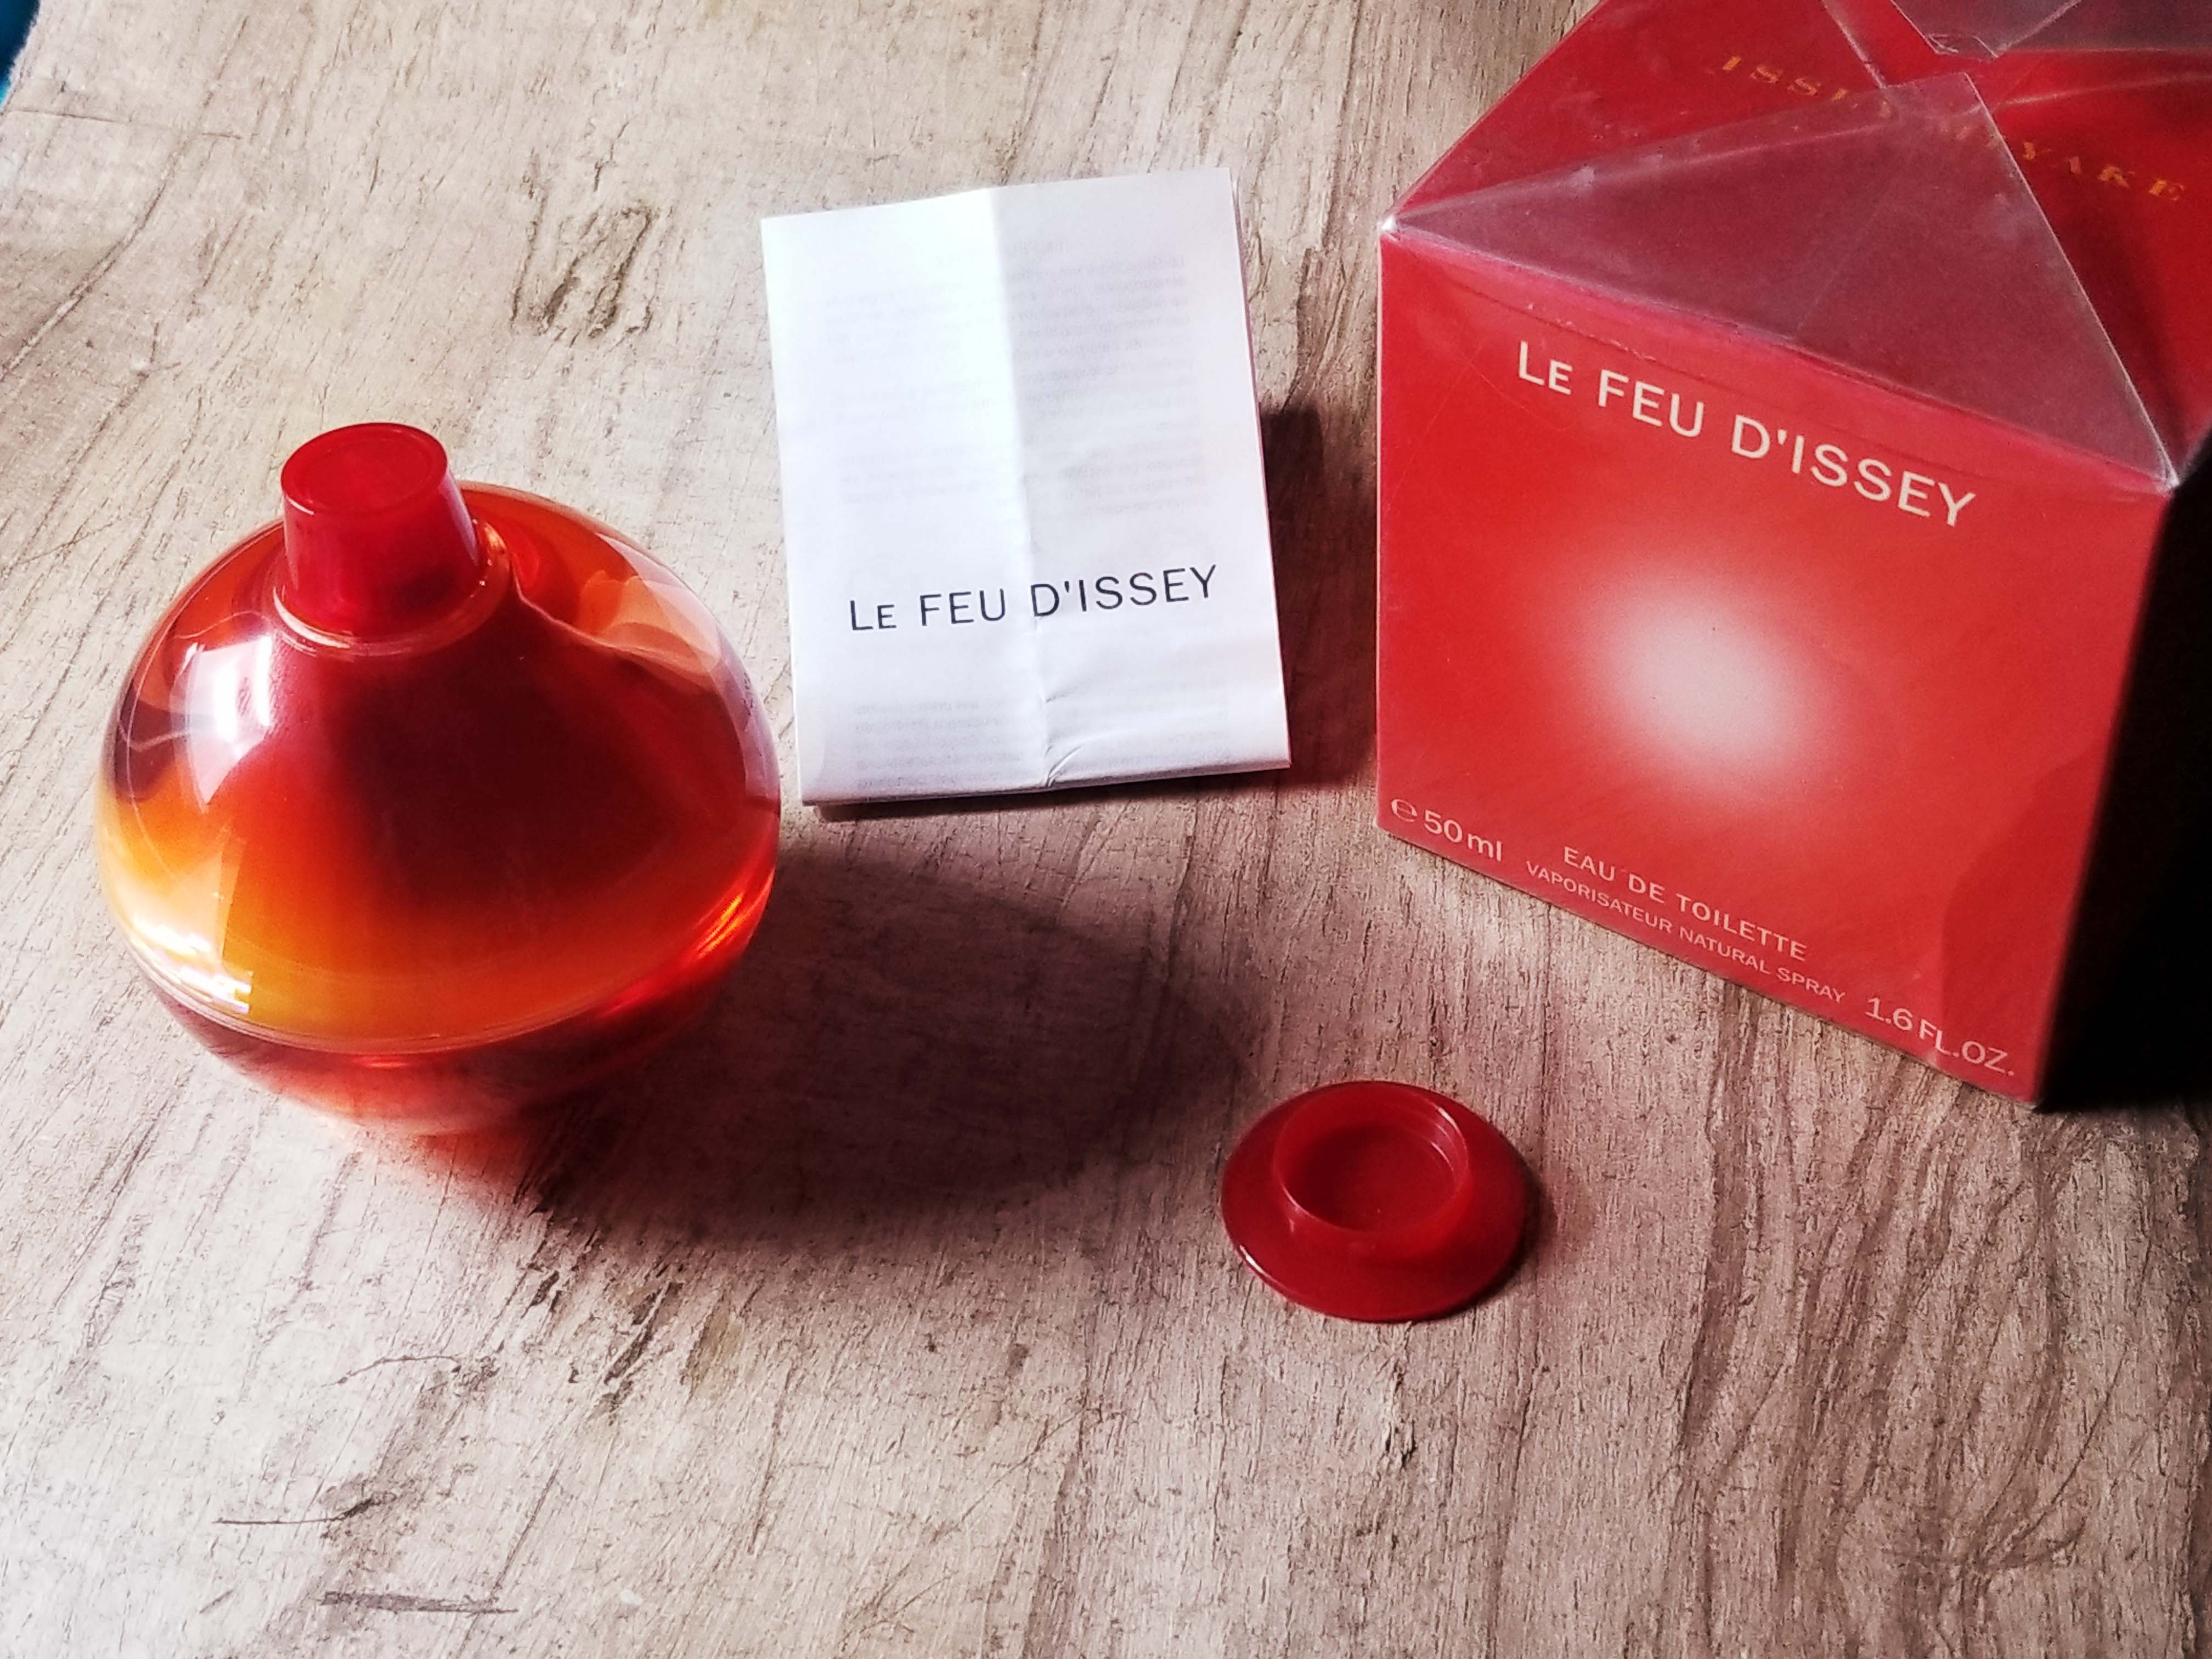 Le Feu d'Issey By Issey Miyake For Women EDT Spray 75 ml 2.5 oz Or